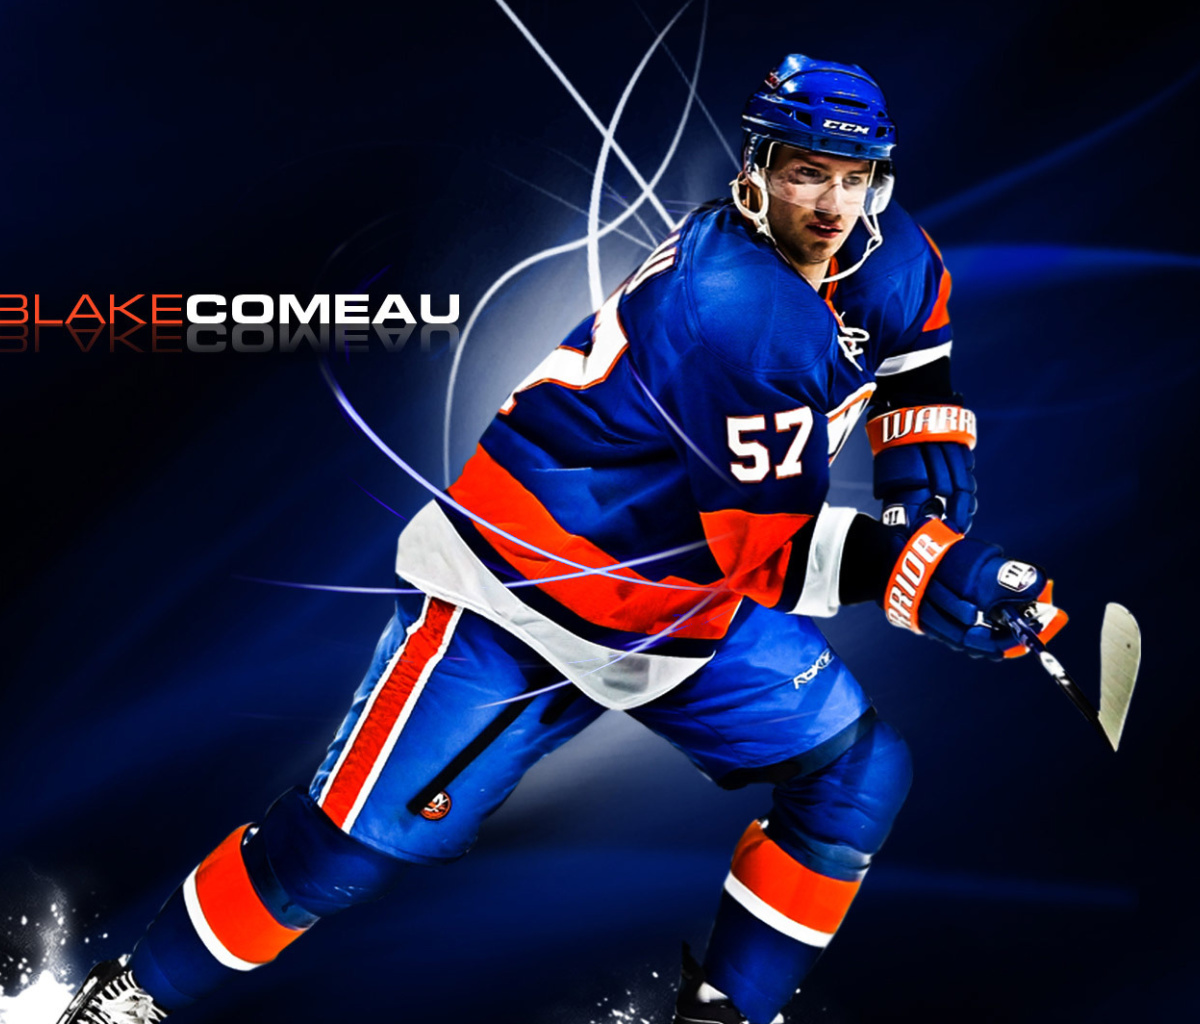 Blake Comeau from HL wallpaper 1200x1024